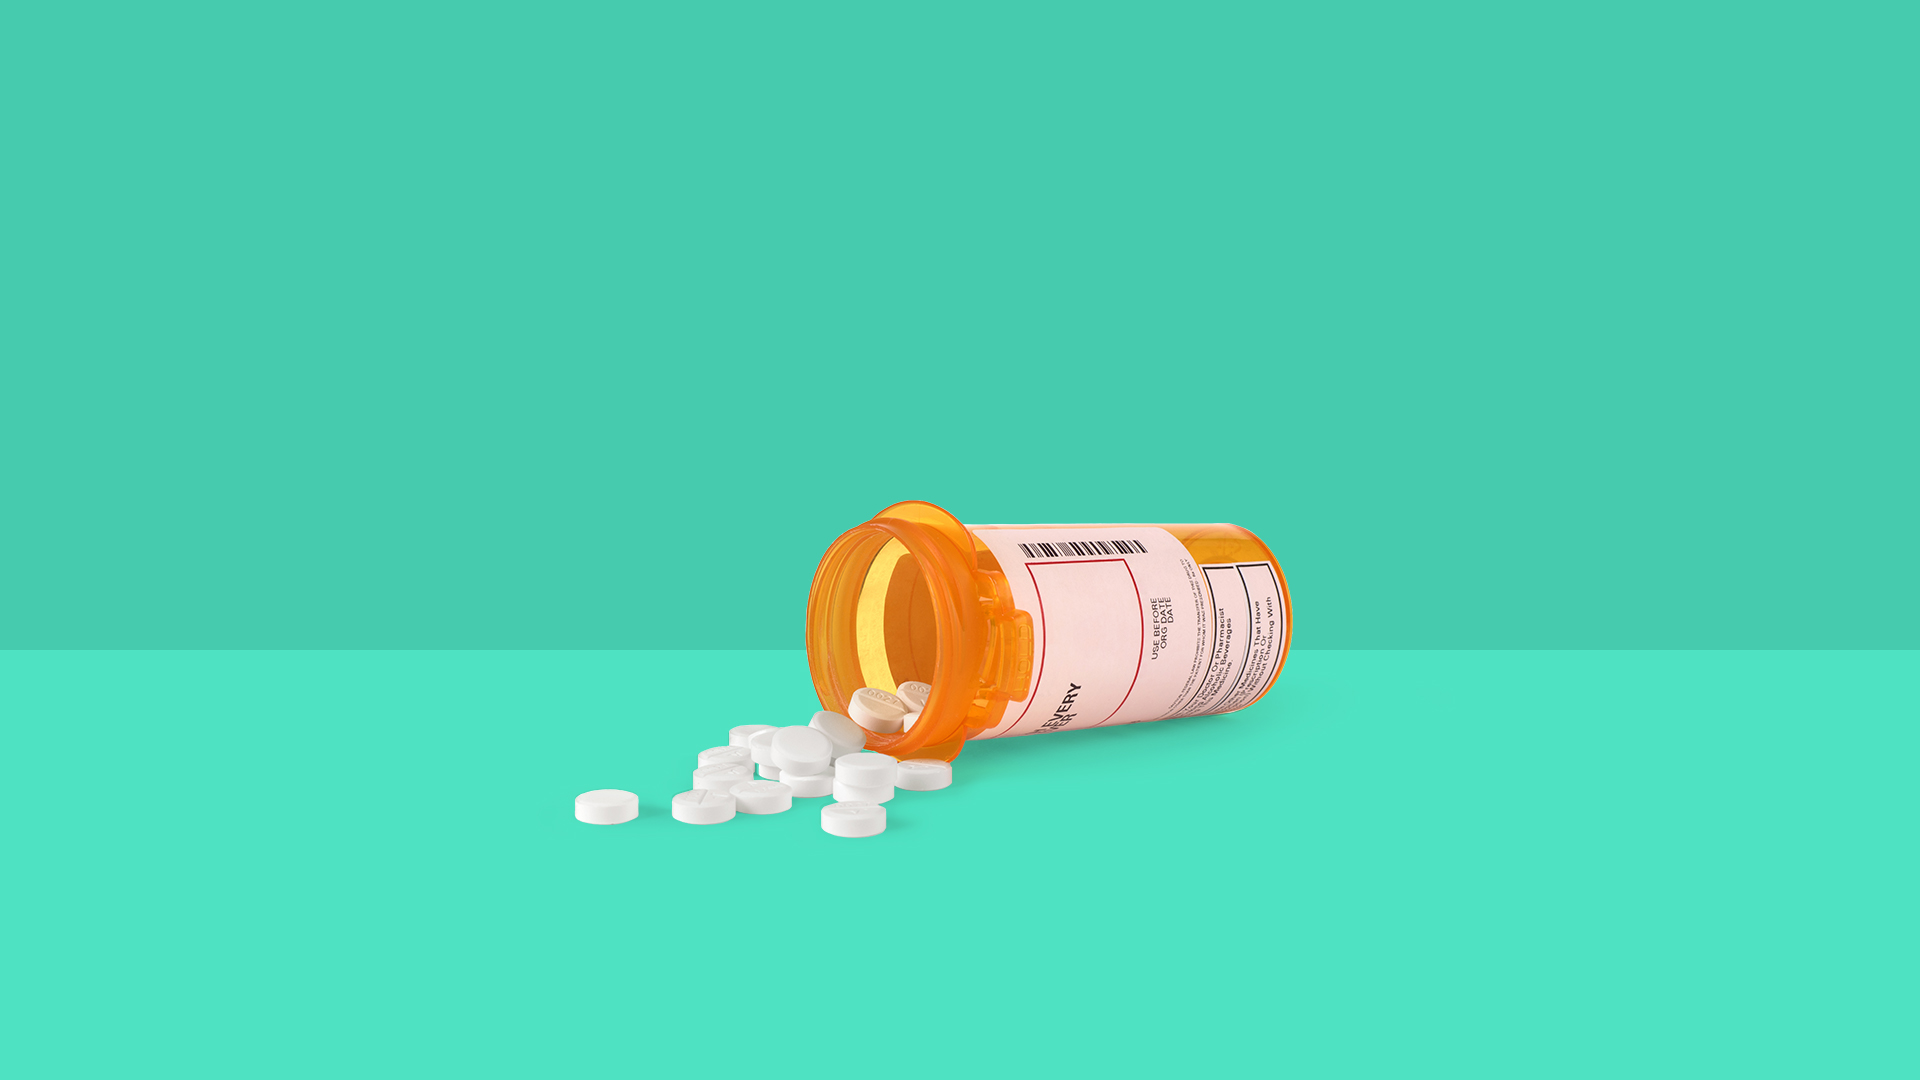 Prescription pill bottle spilled: Compare common vs. serious nifedipine side effects